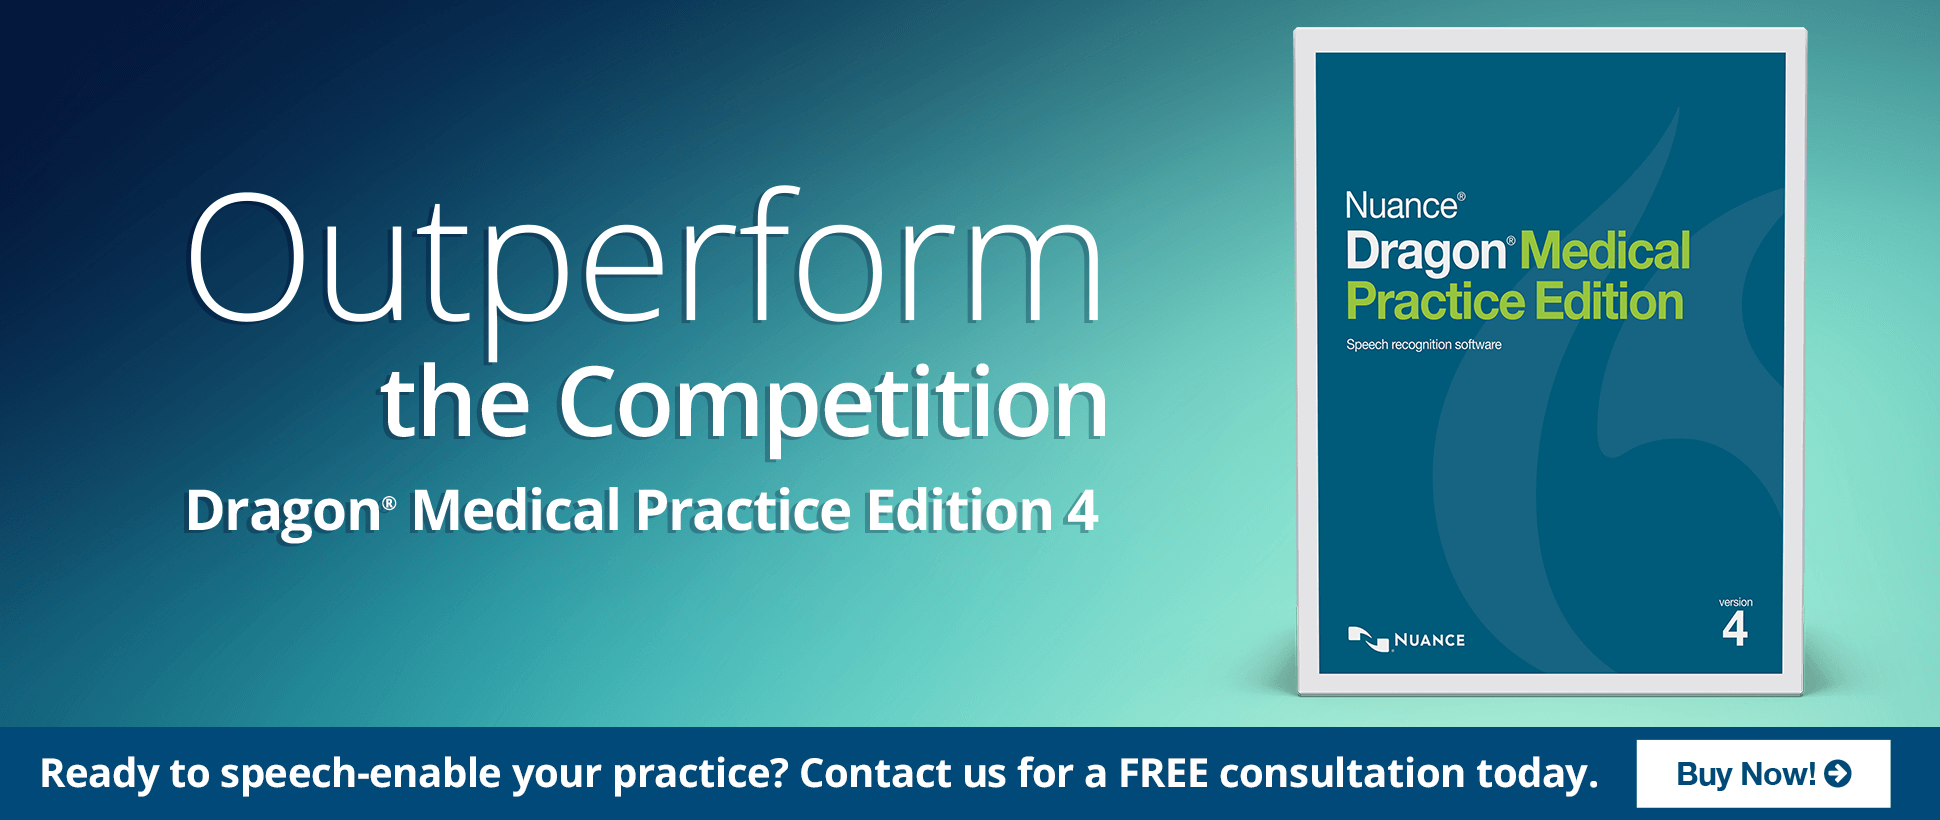 Outperform the competition - Dragon Medical Practice Edition 4